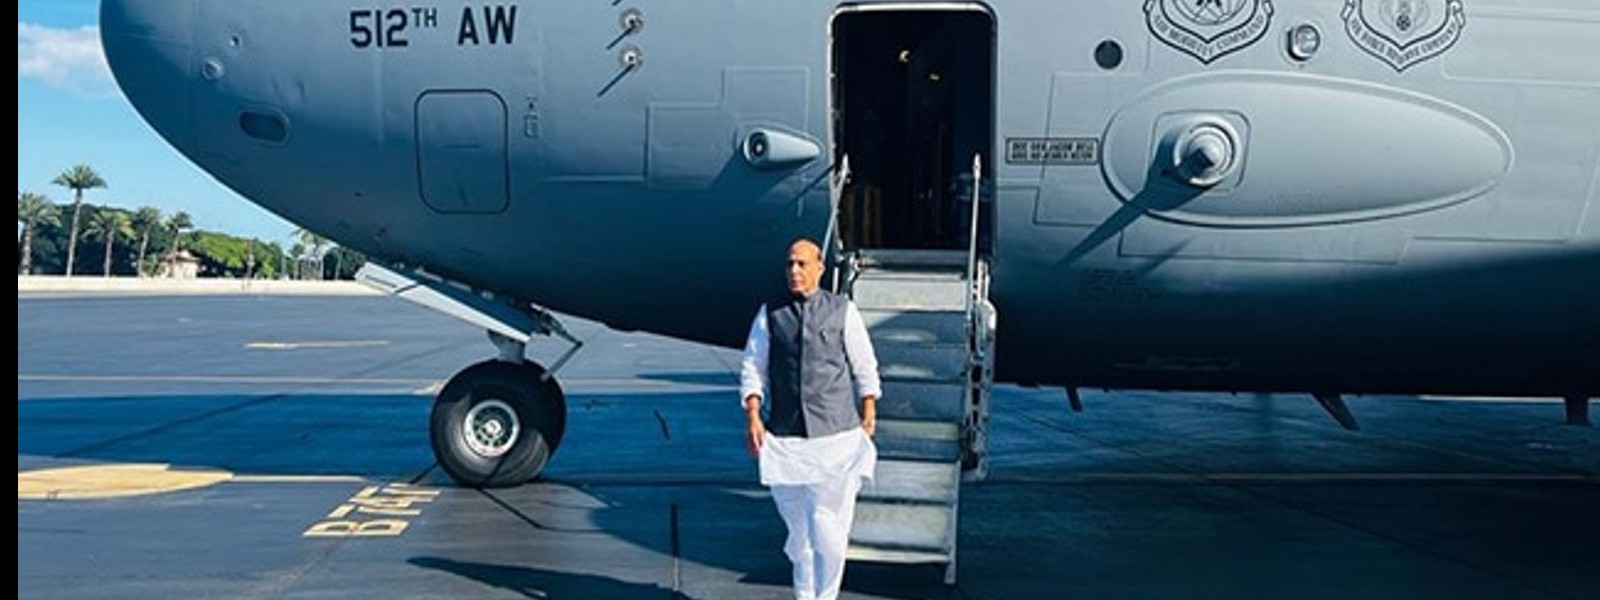 “If Harmed, India Will…”: Rajnath Singh’s Strong Message